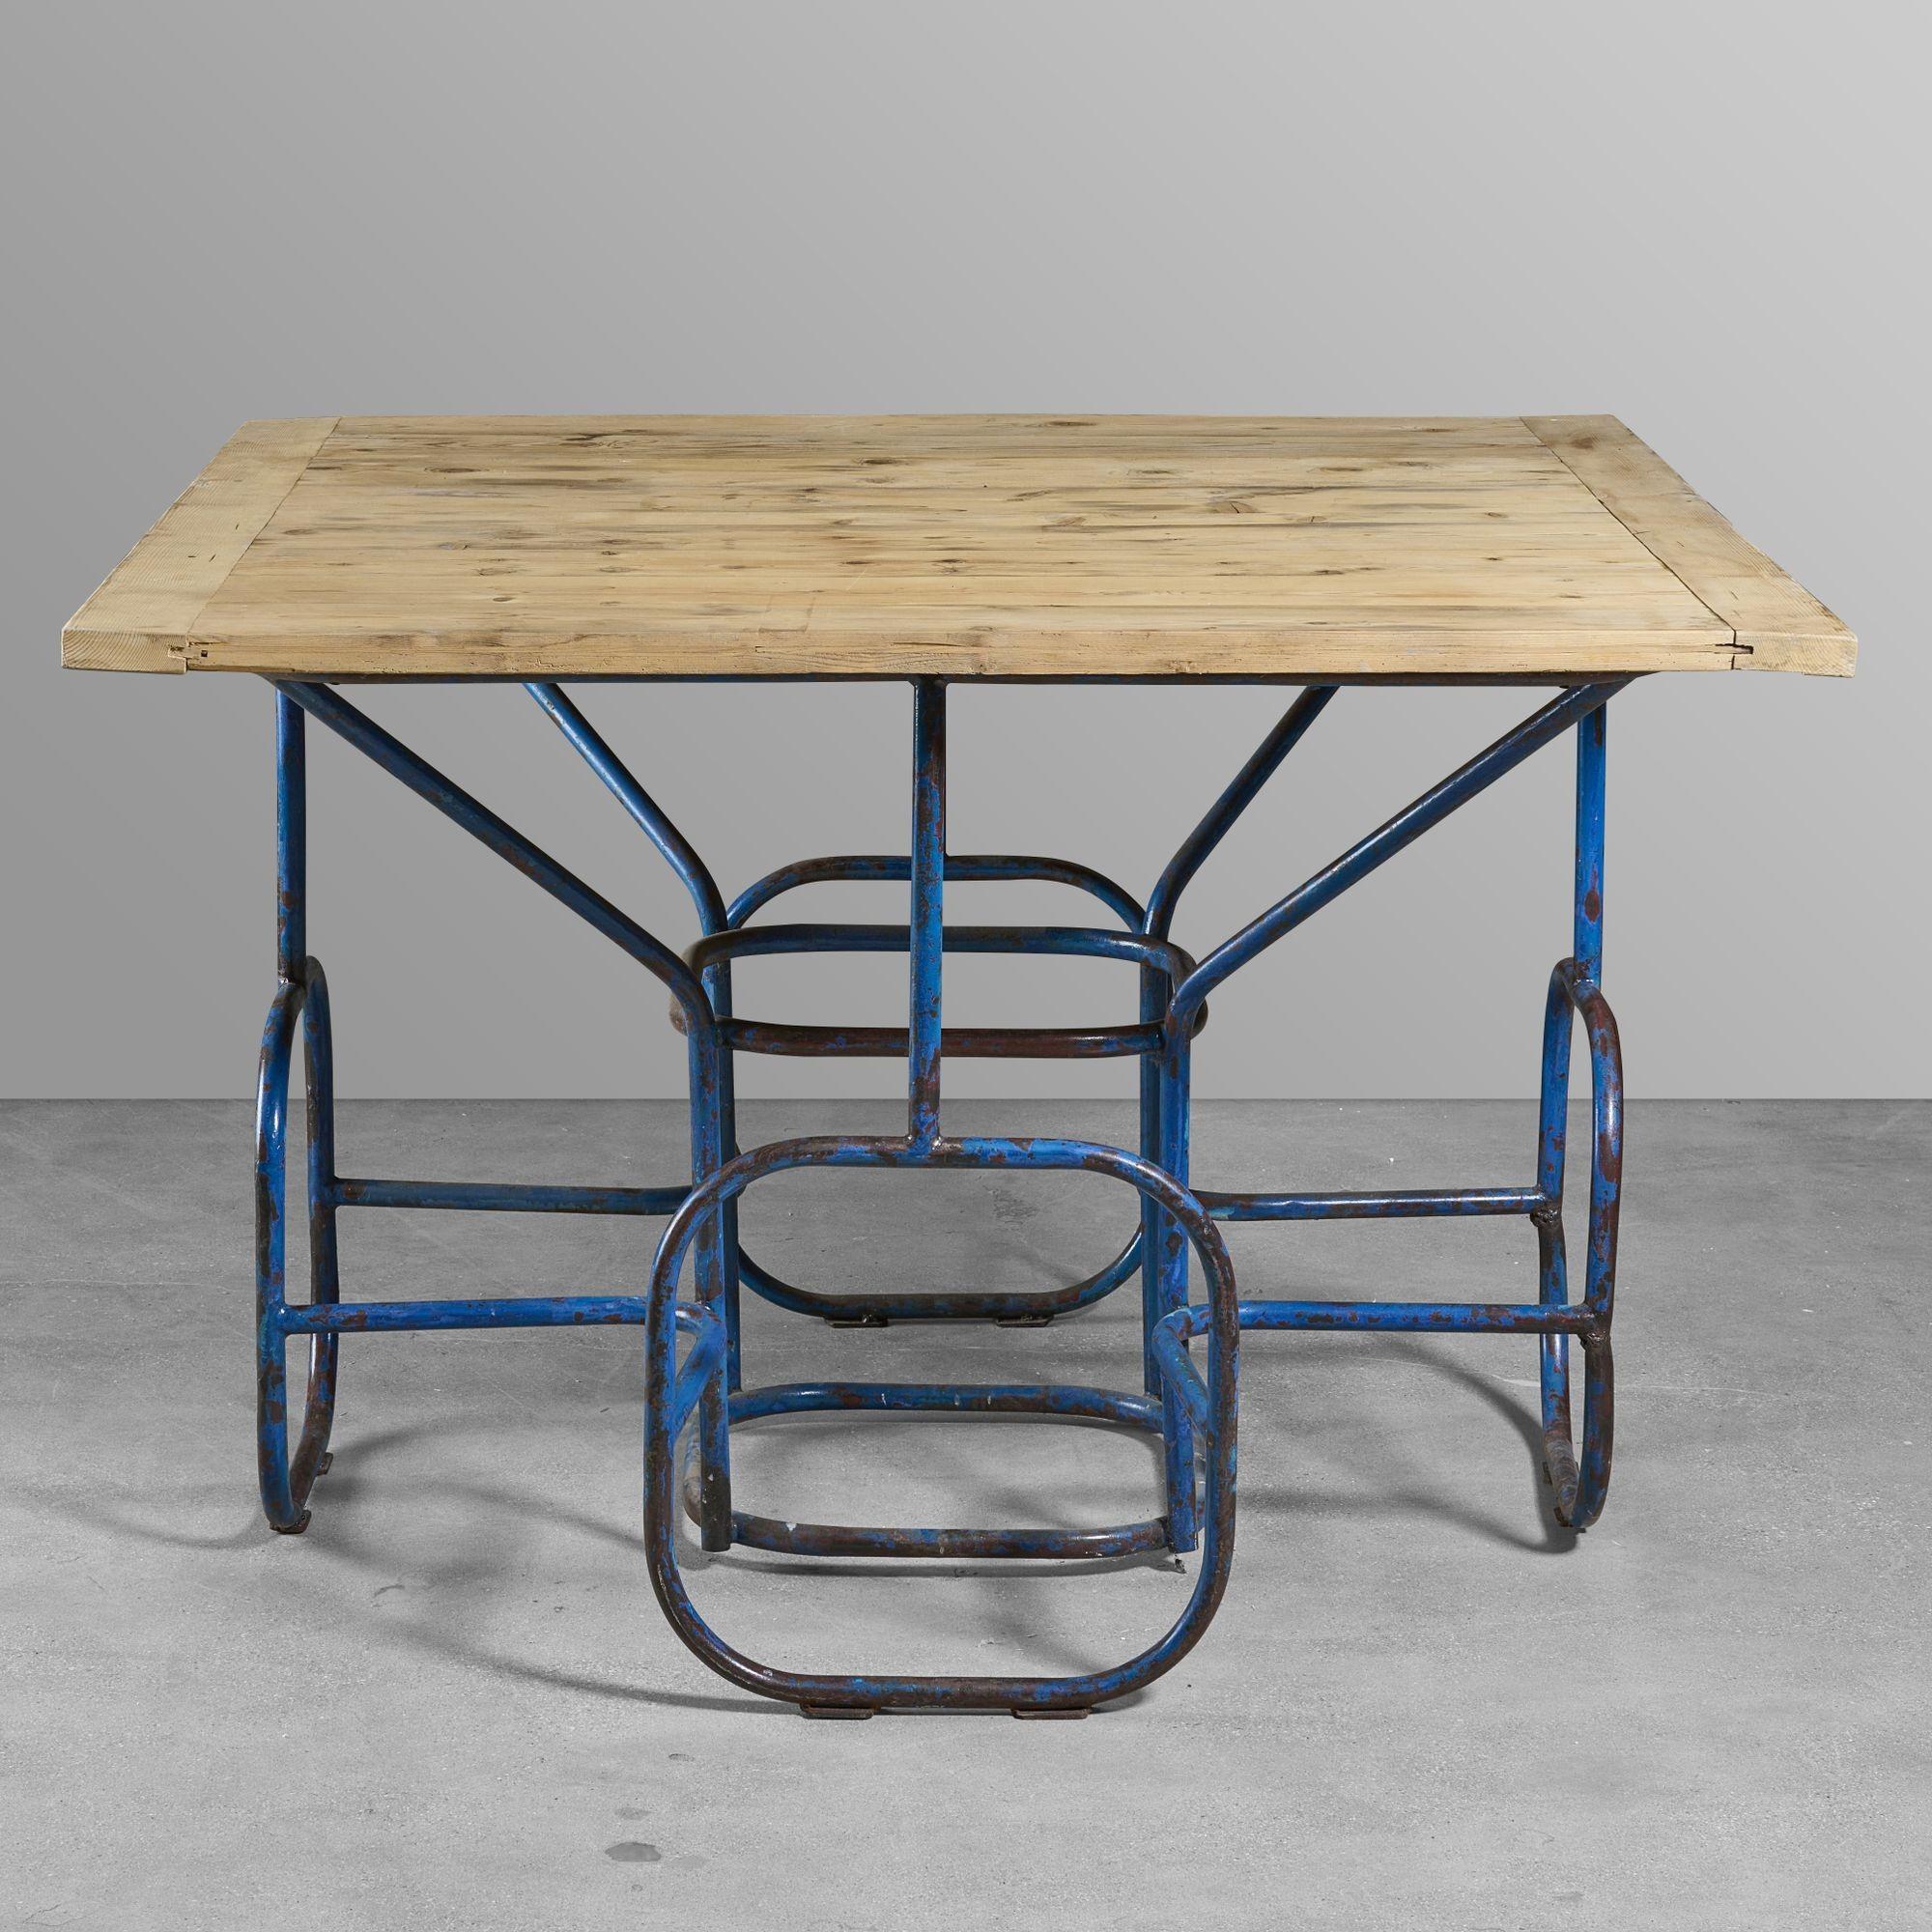 20th Century Wooden Table For Sale